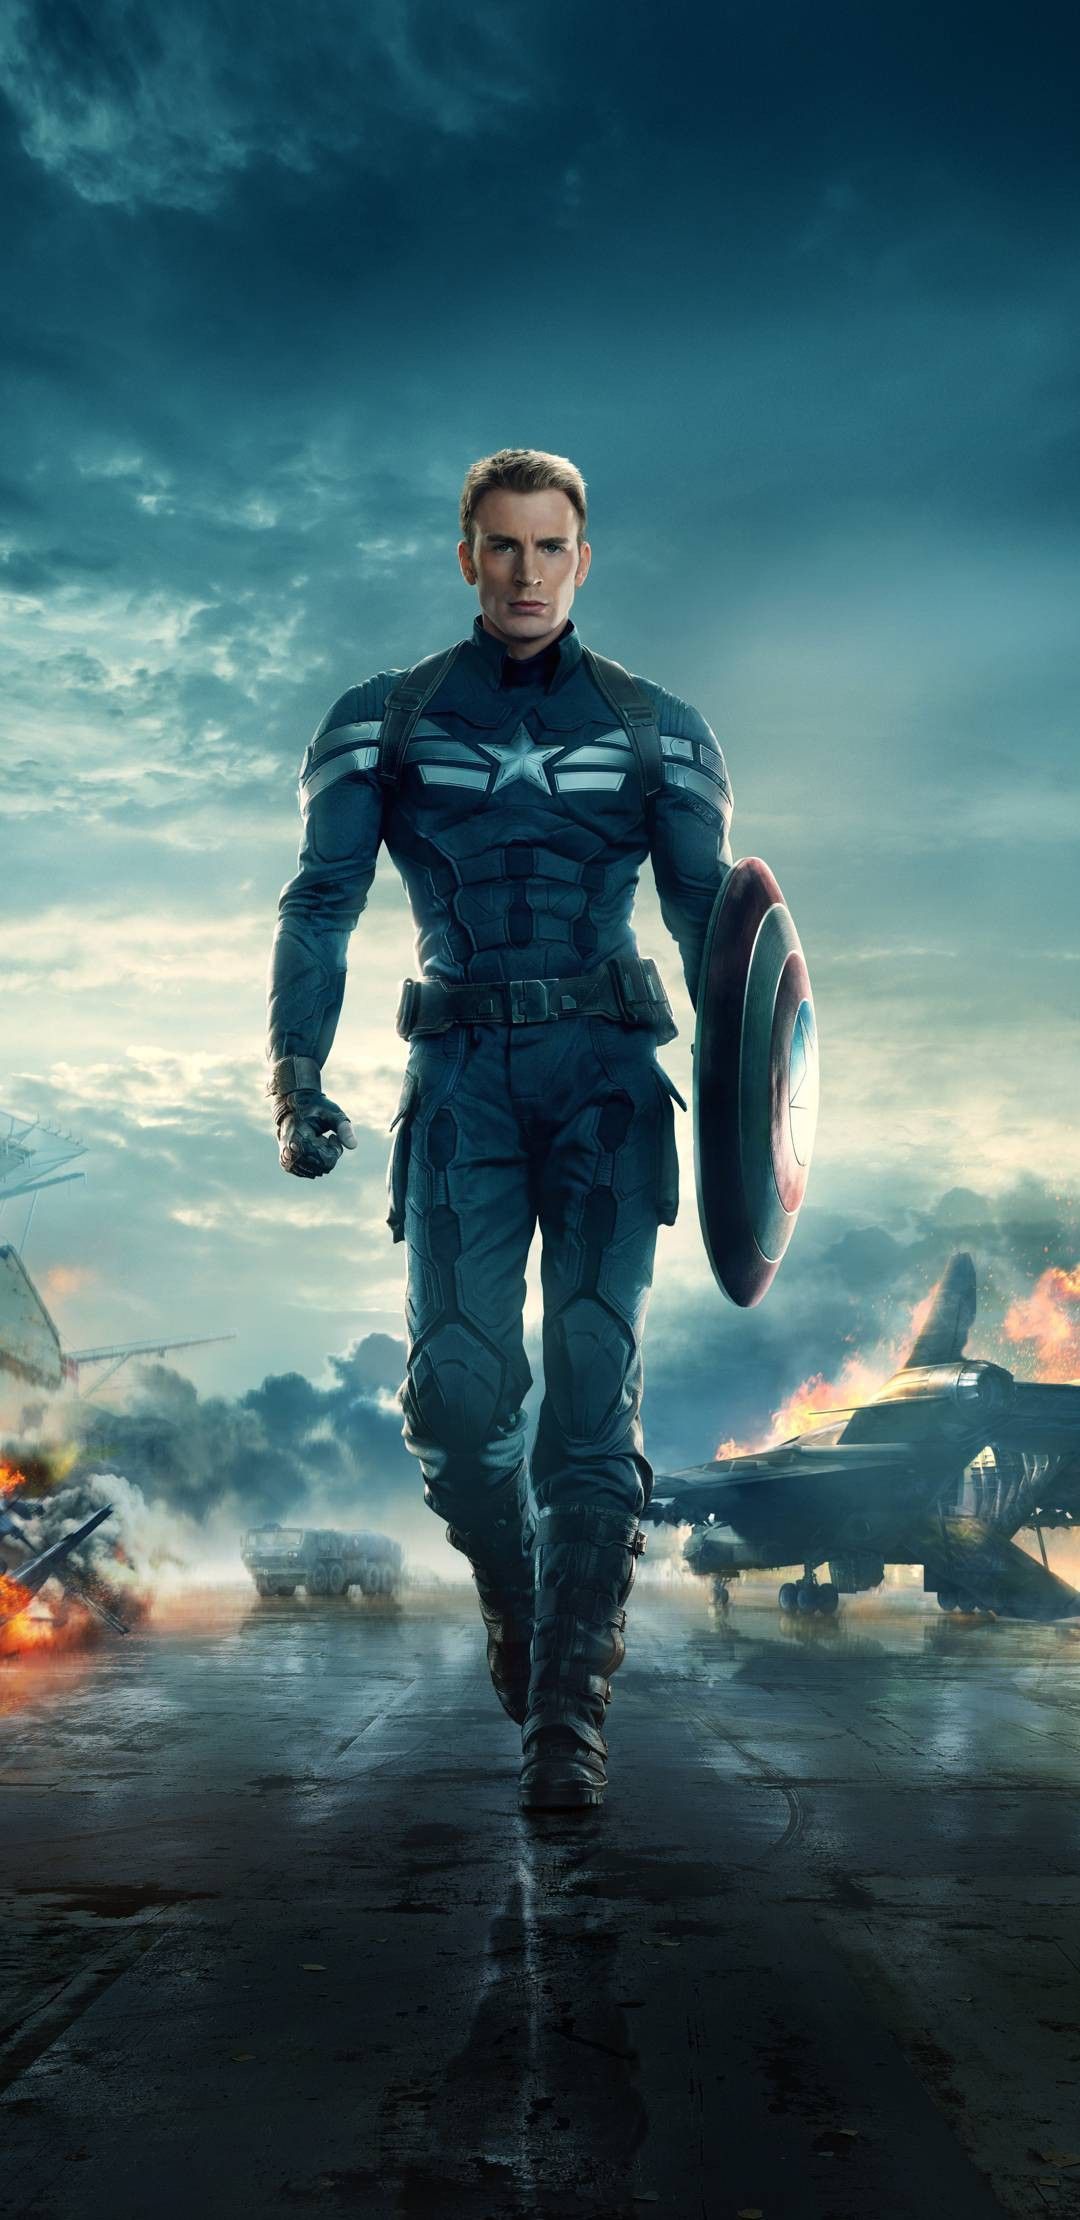 Captain America: The Winter Solider textless wallpaper